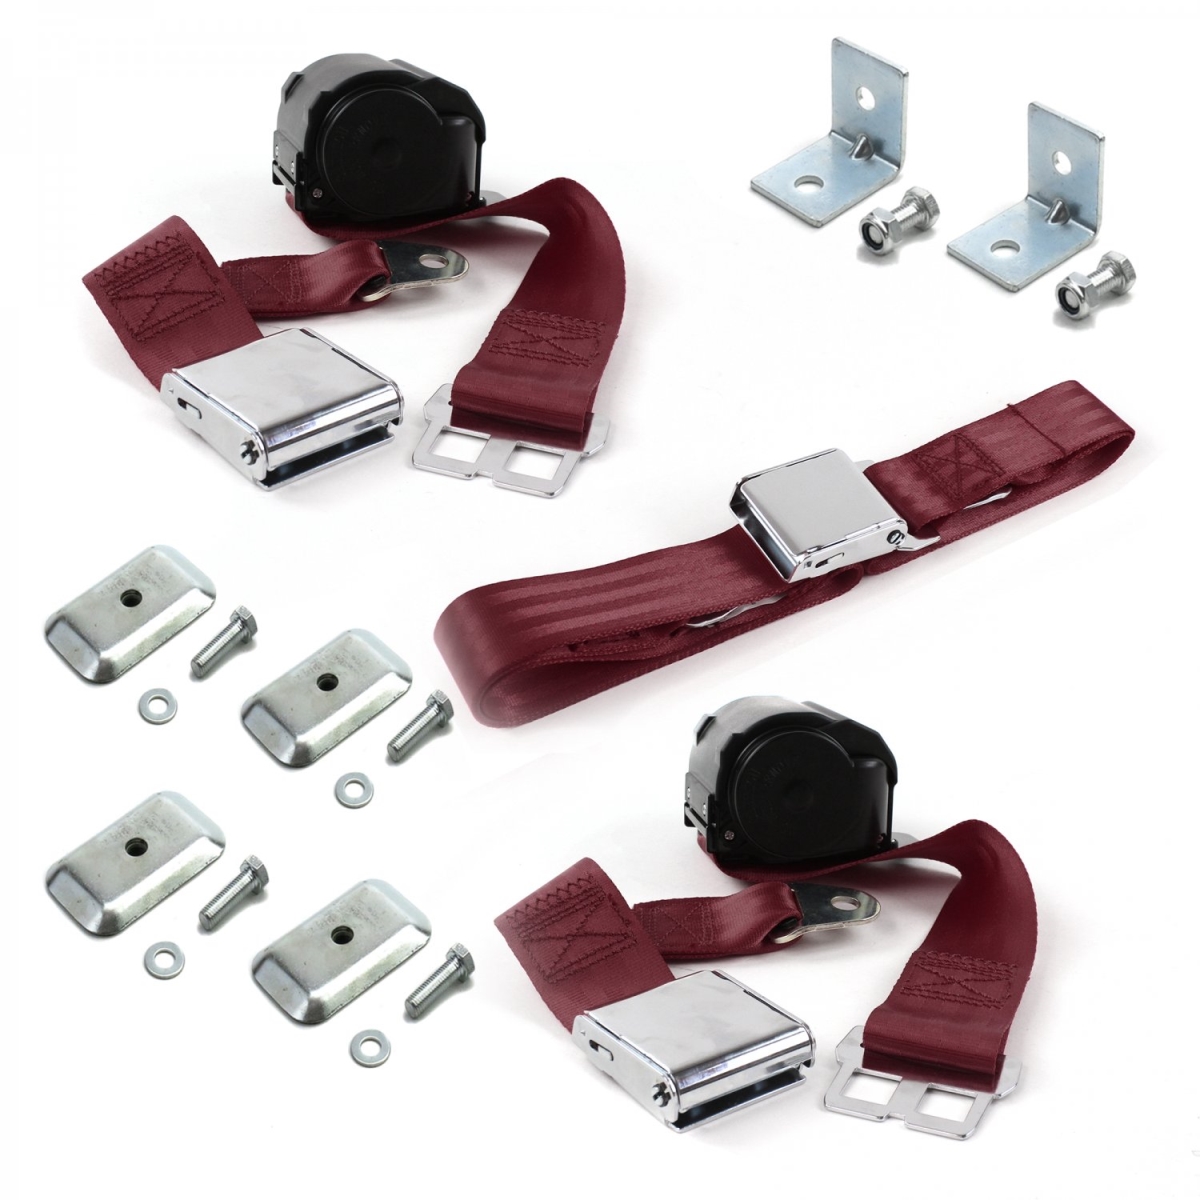 683311 Burgandy Retractable Bench Seat Belt Kit with Bracketry for 1958-1988 AMC Airplane 2 Point - 3 Belts -  safeTboy